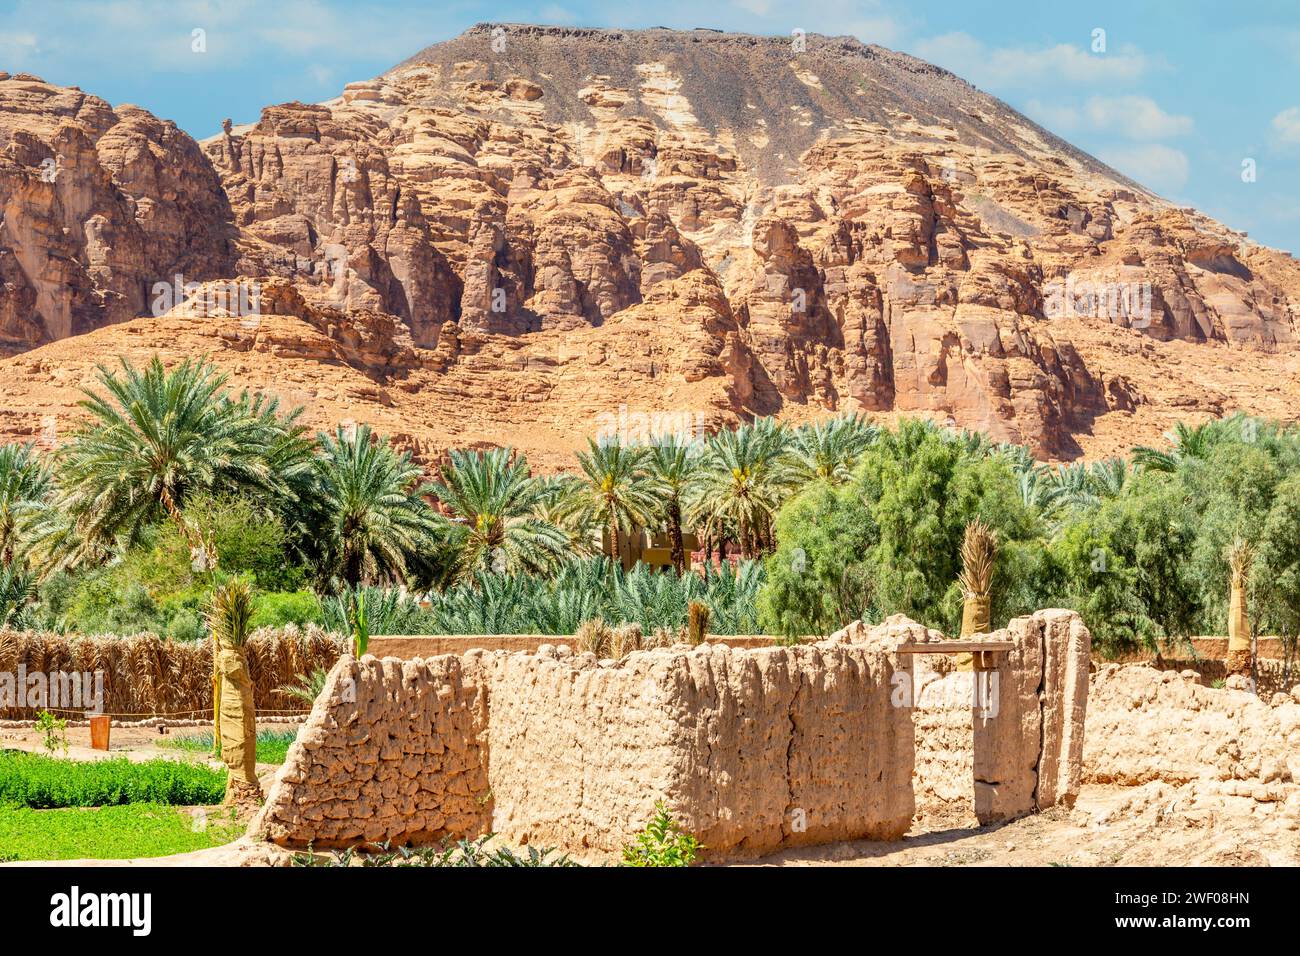 Al Ula ruined old town streets with palms and mountain in the background, Saudi Arabia Stock Photo